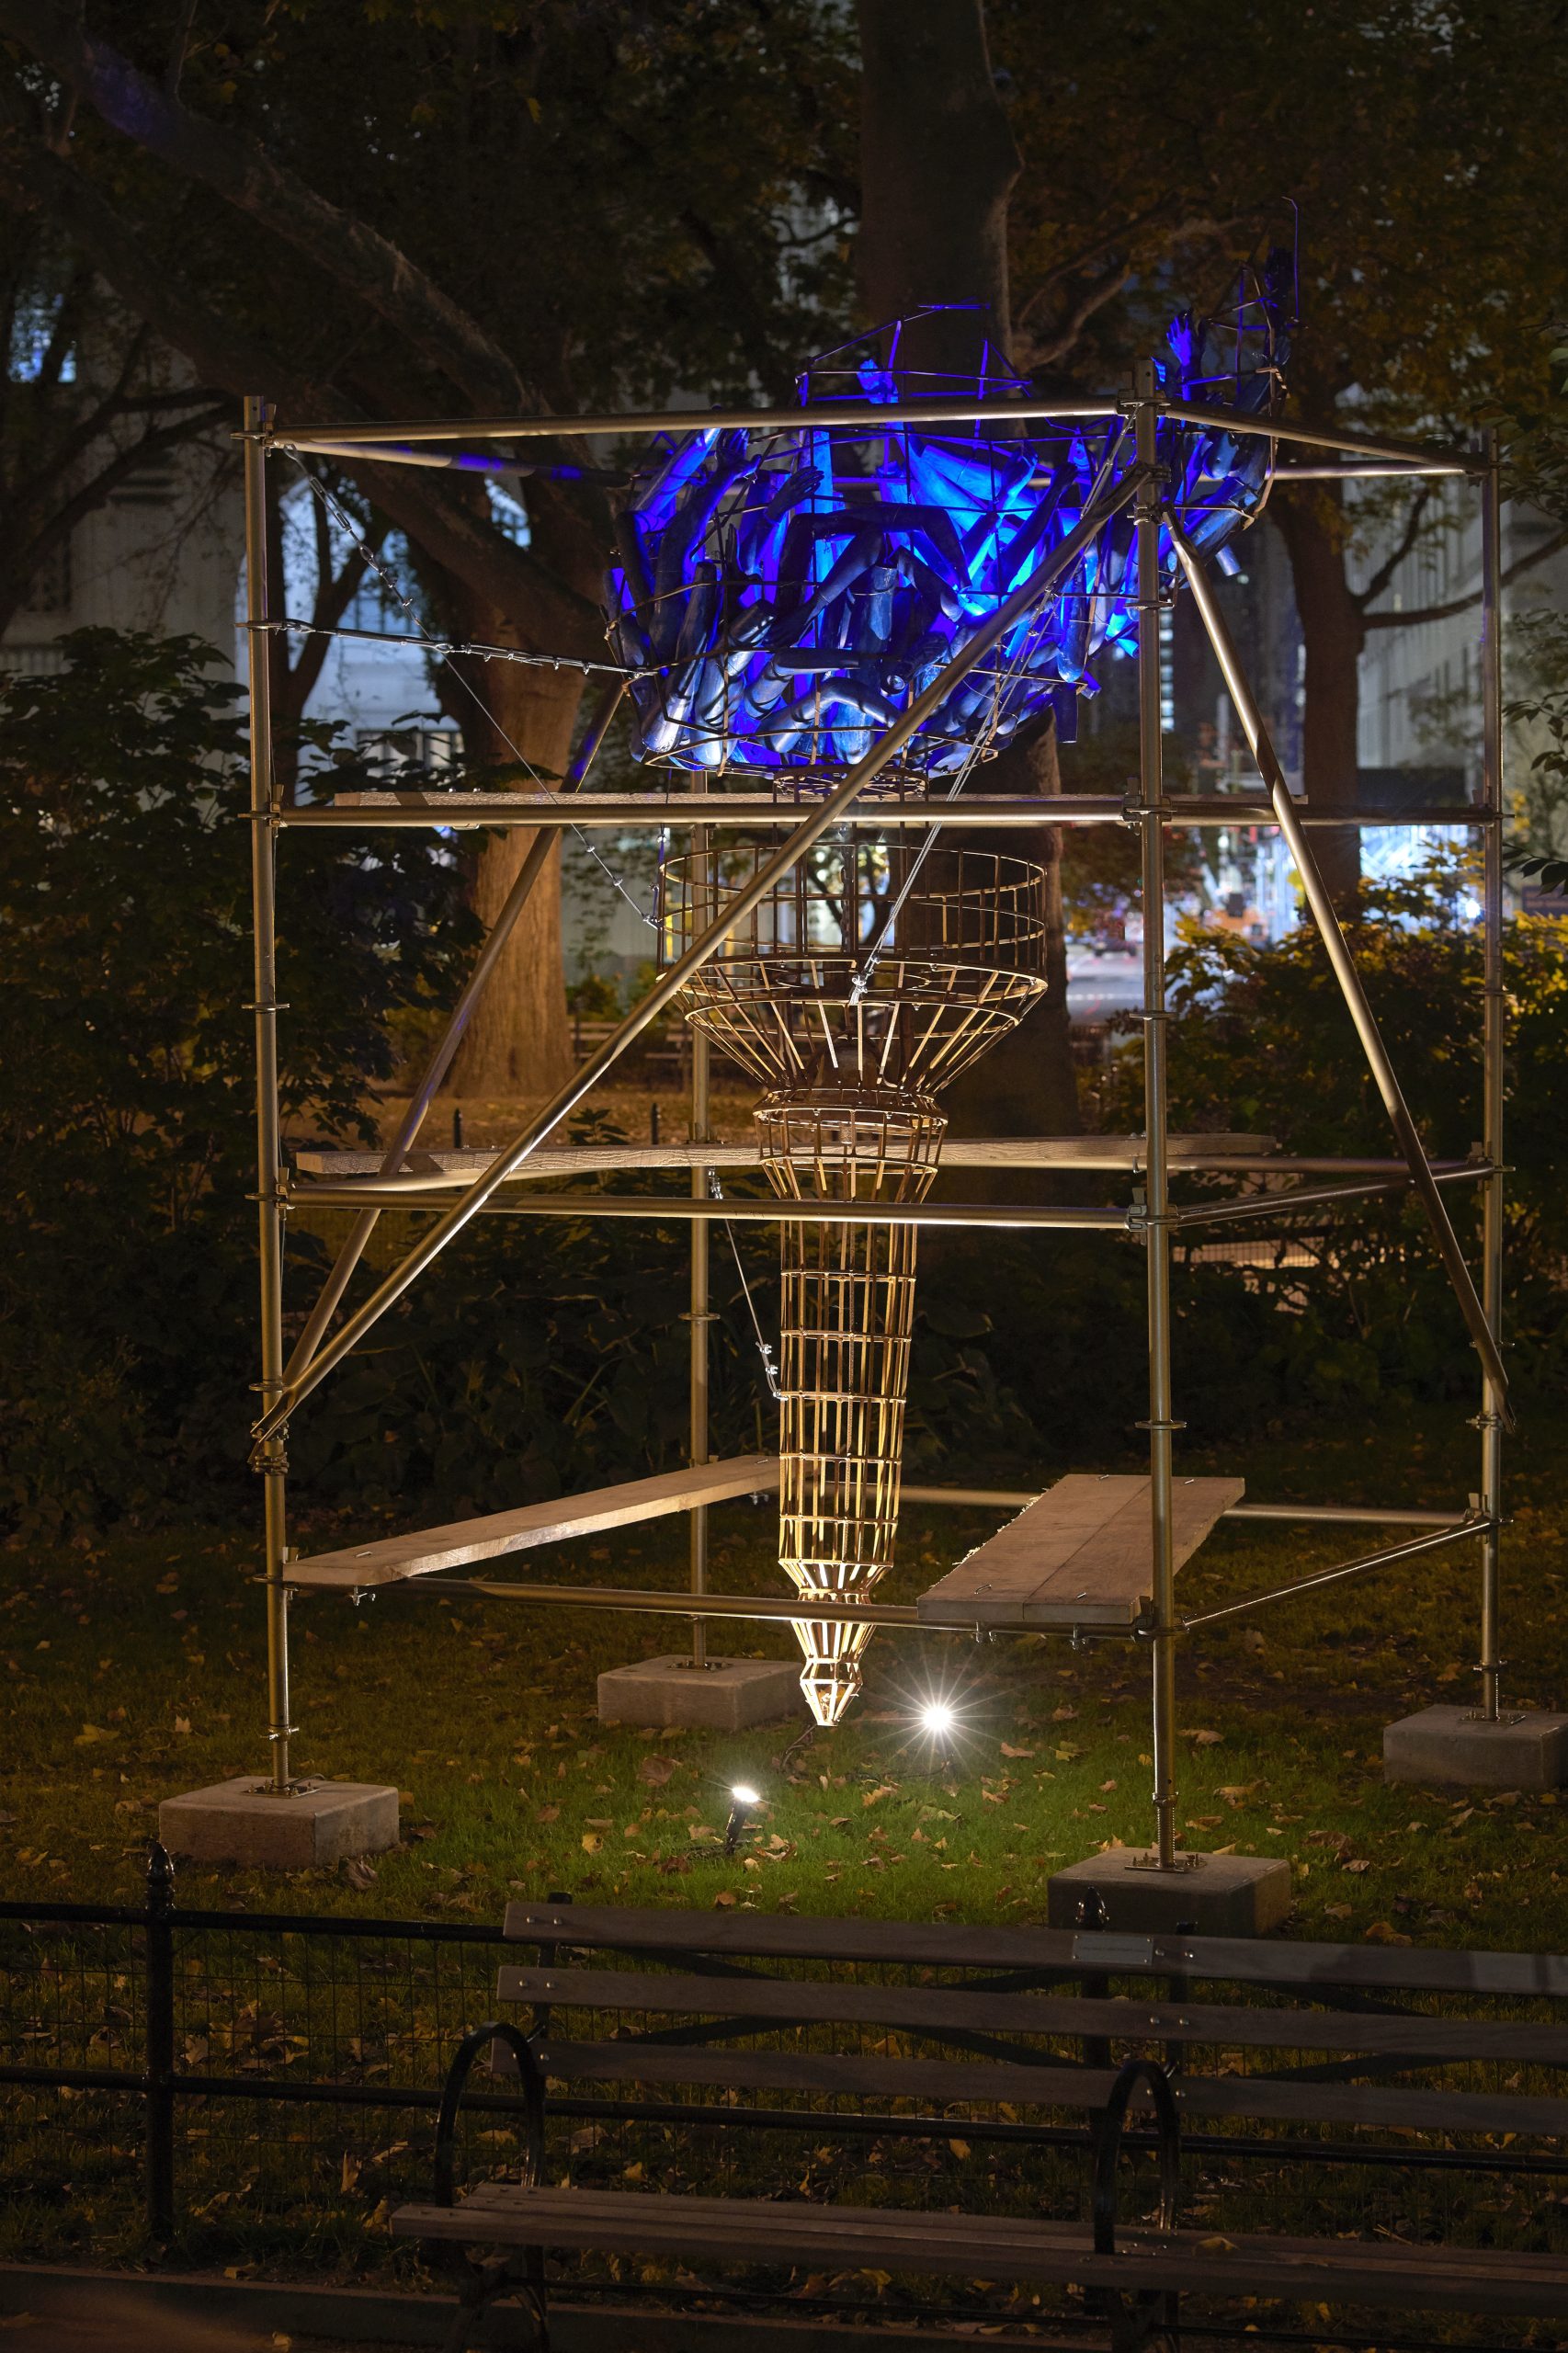 Abigail DeVille, The Light of Freedom, 2020-2021, Madison Square Park Conservancy